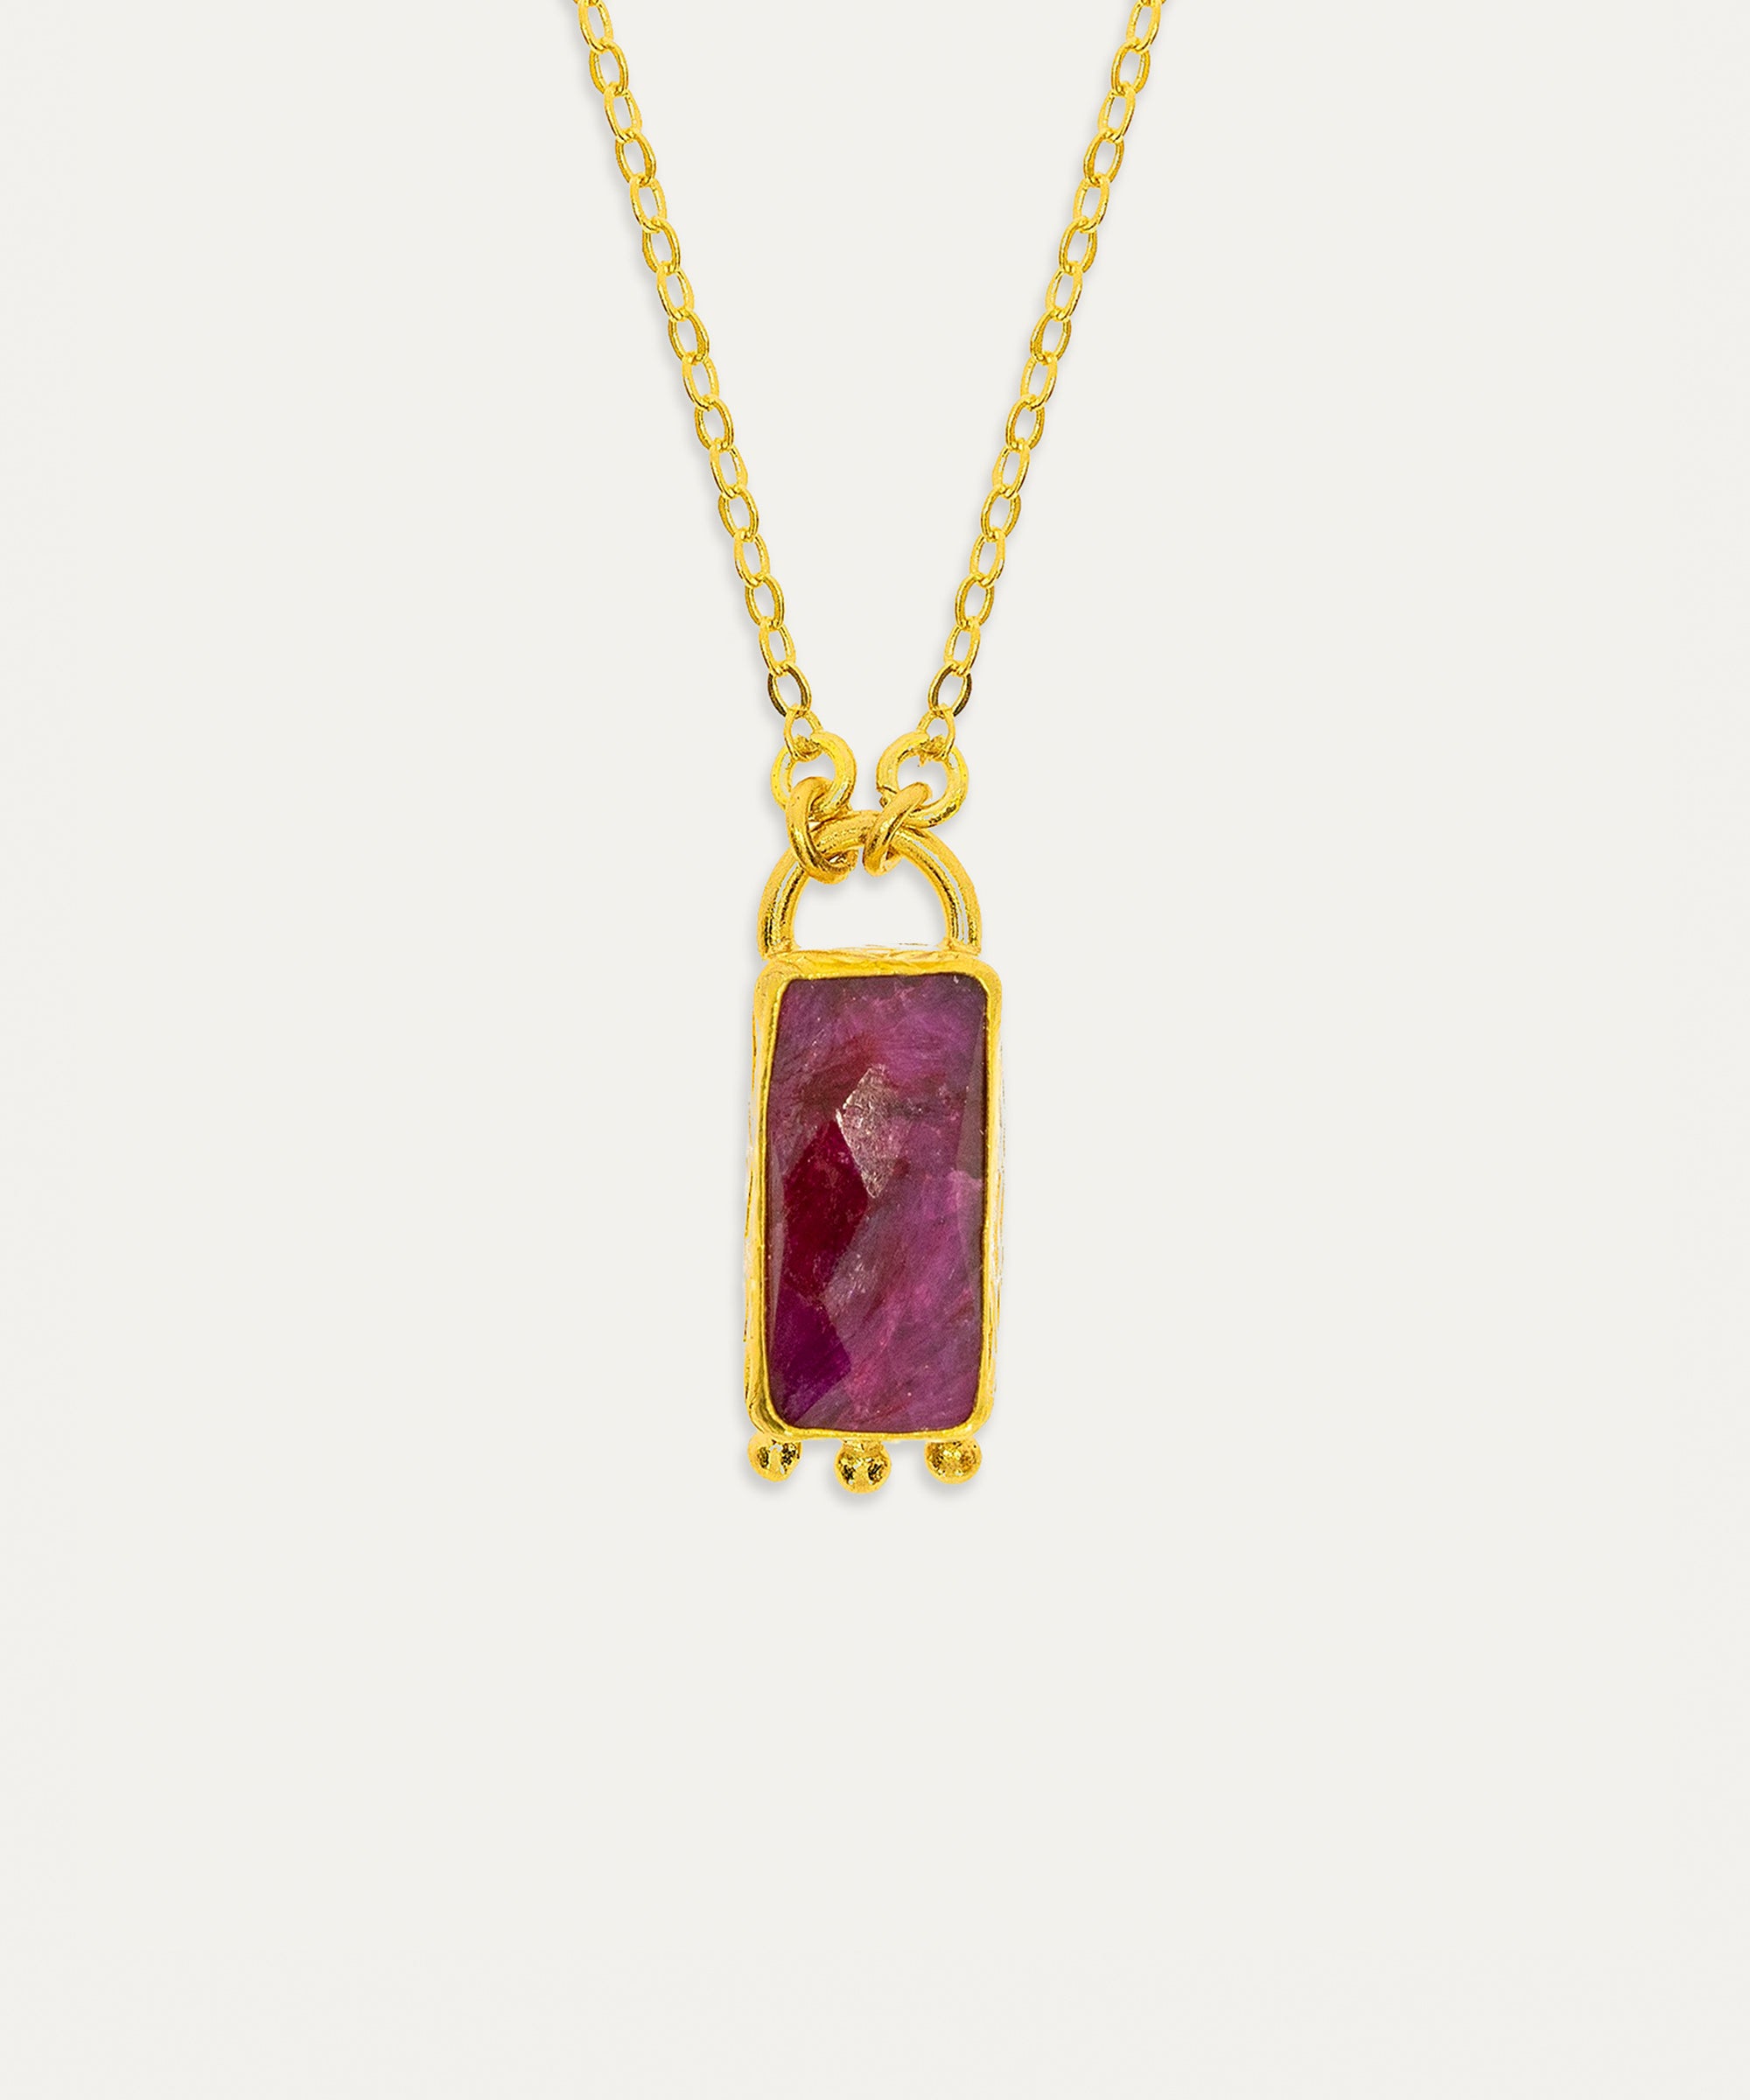 Nima Ruby Pendant Necklace | Sustainable Jewellery by Ottoman Hands